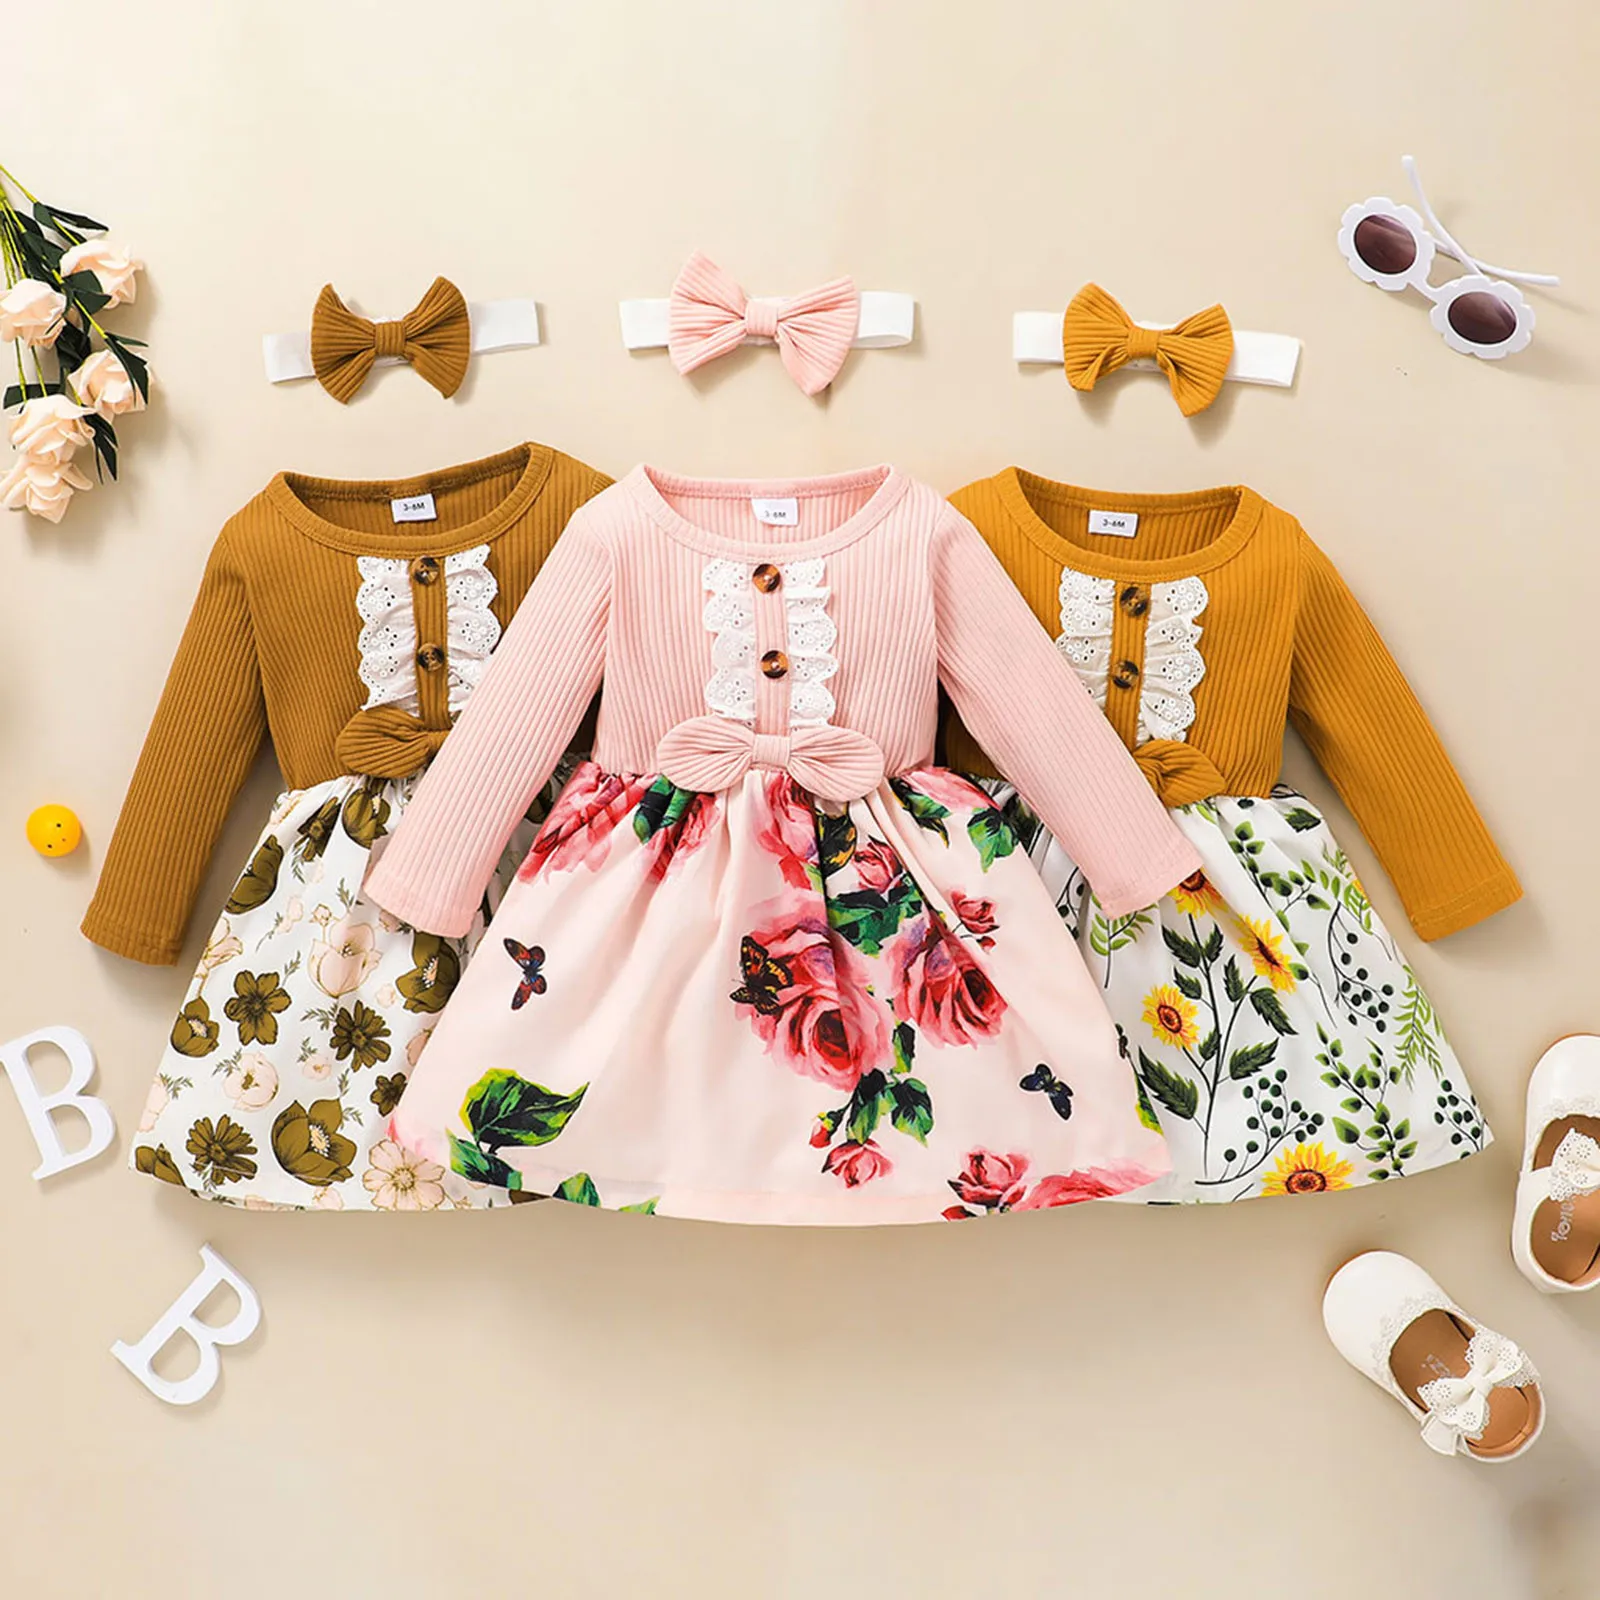 

Girl Clothes Vintage Bow Dress Splice Party Princess Baby Floral Toddler Kid Ribbed Ruffled Girls Girls Dress&Skirt